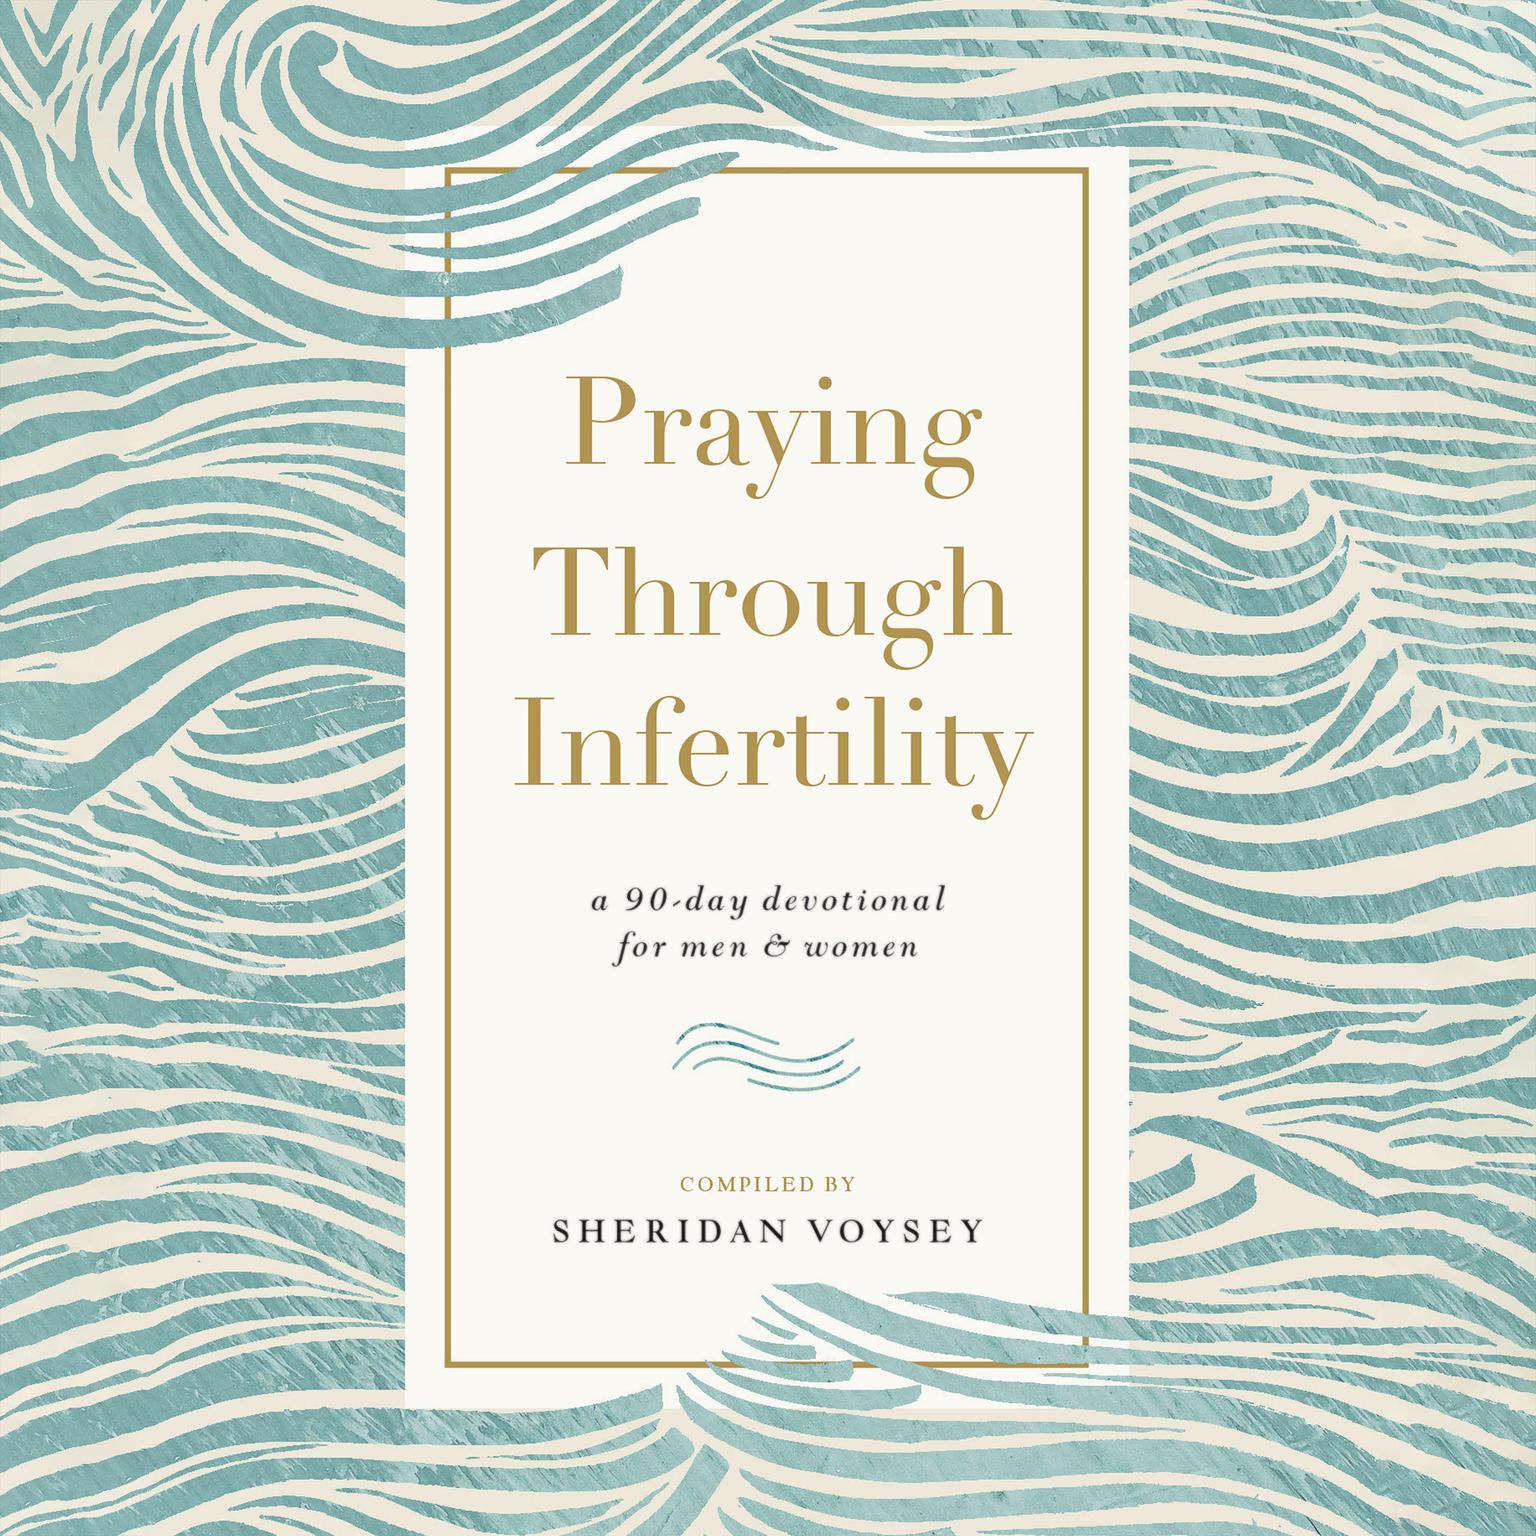 Praying Through Infertility: A 90-Day Devotional for Men and Women Audiobook, by Sheridan Voysey